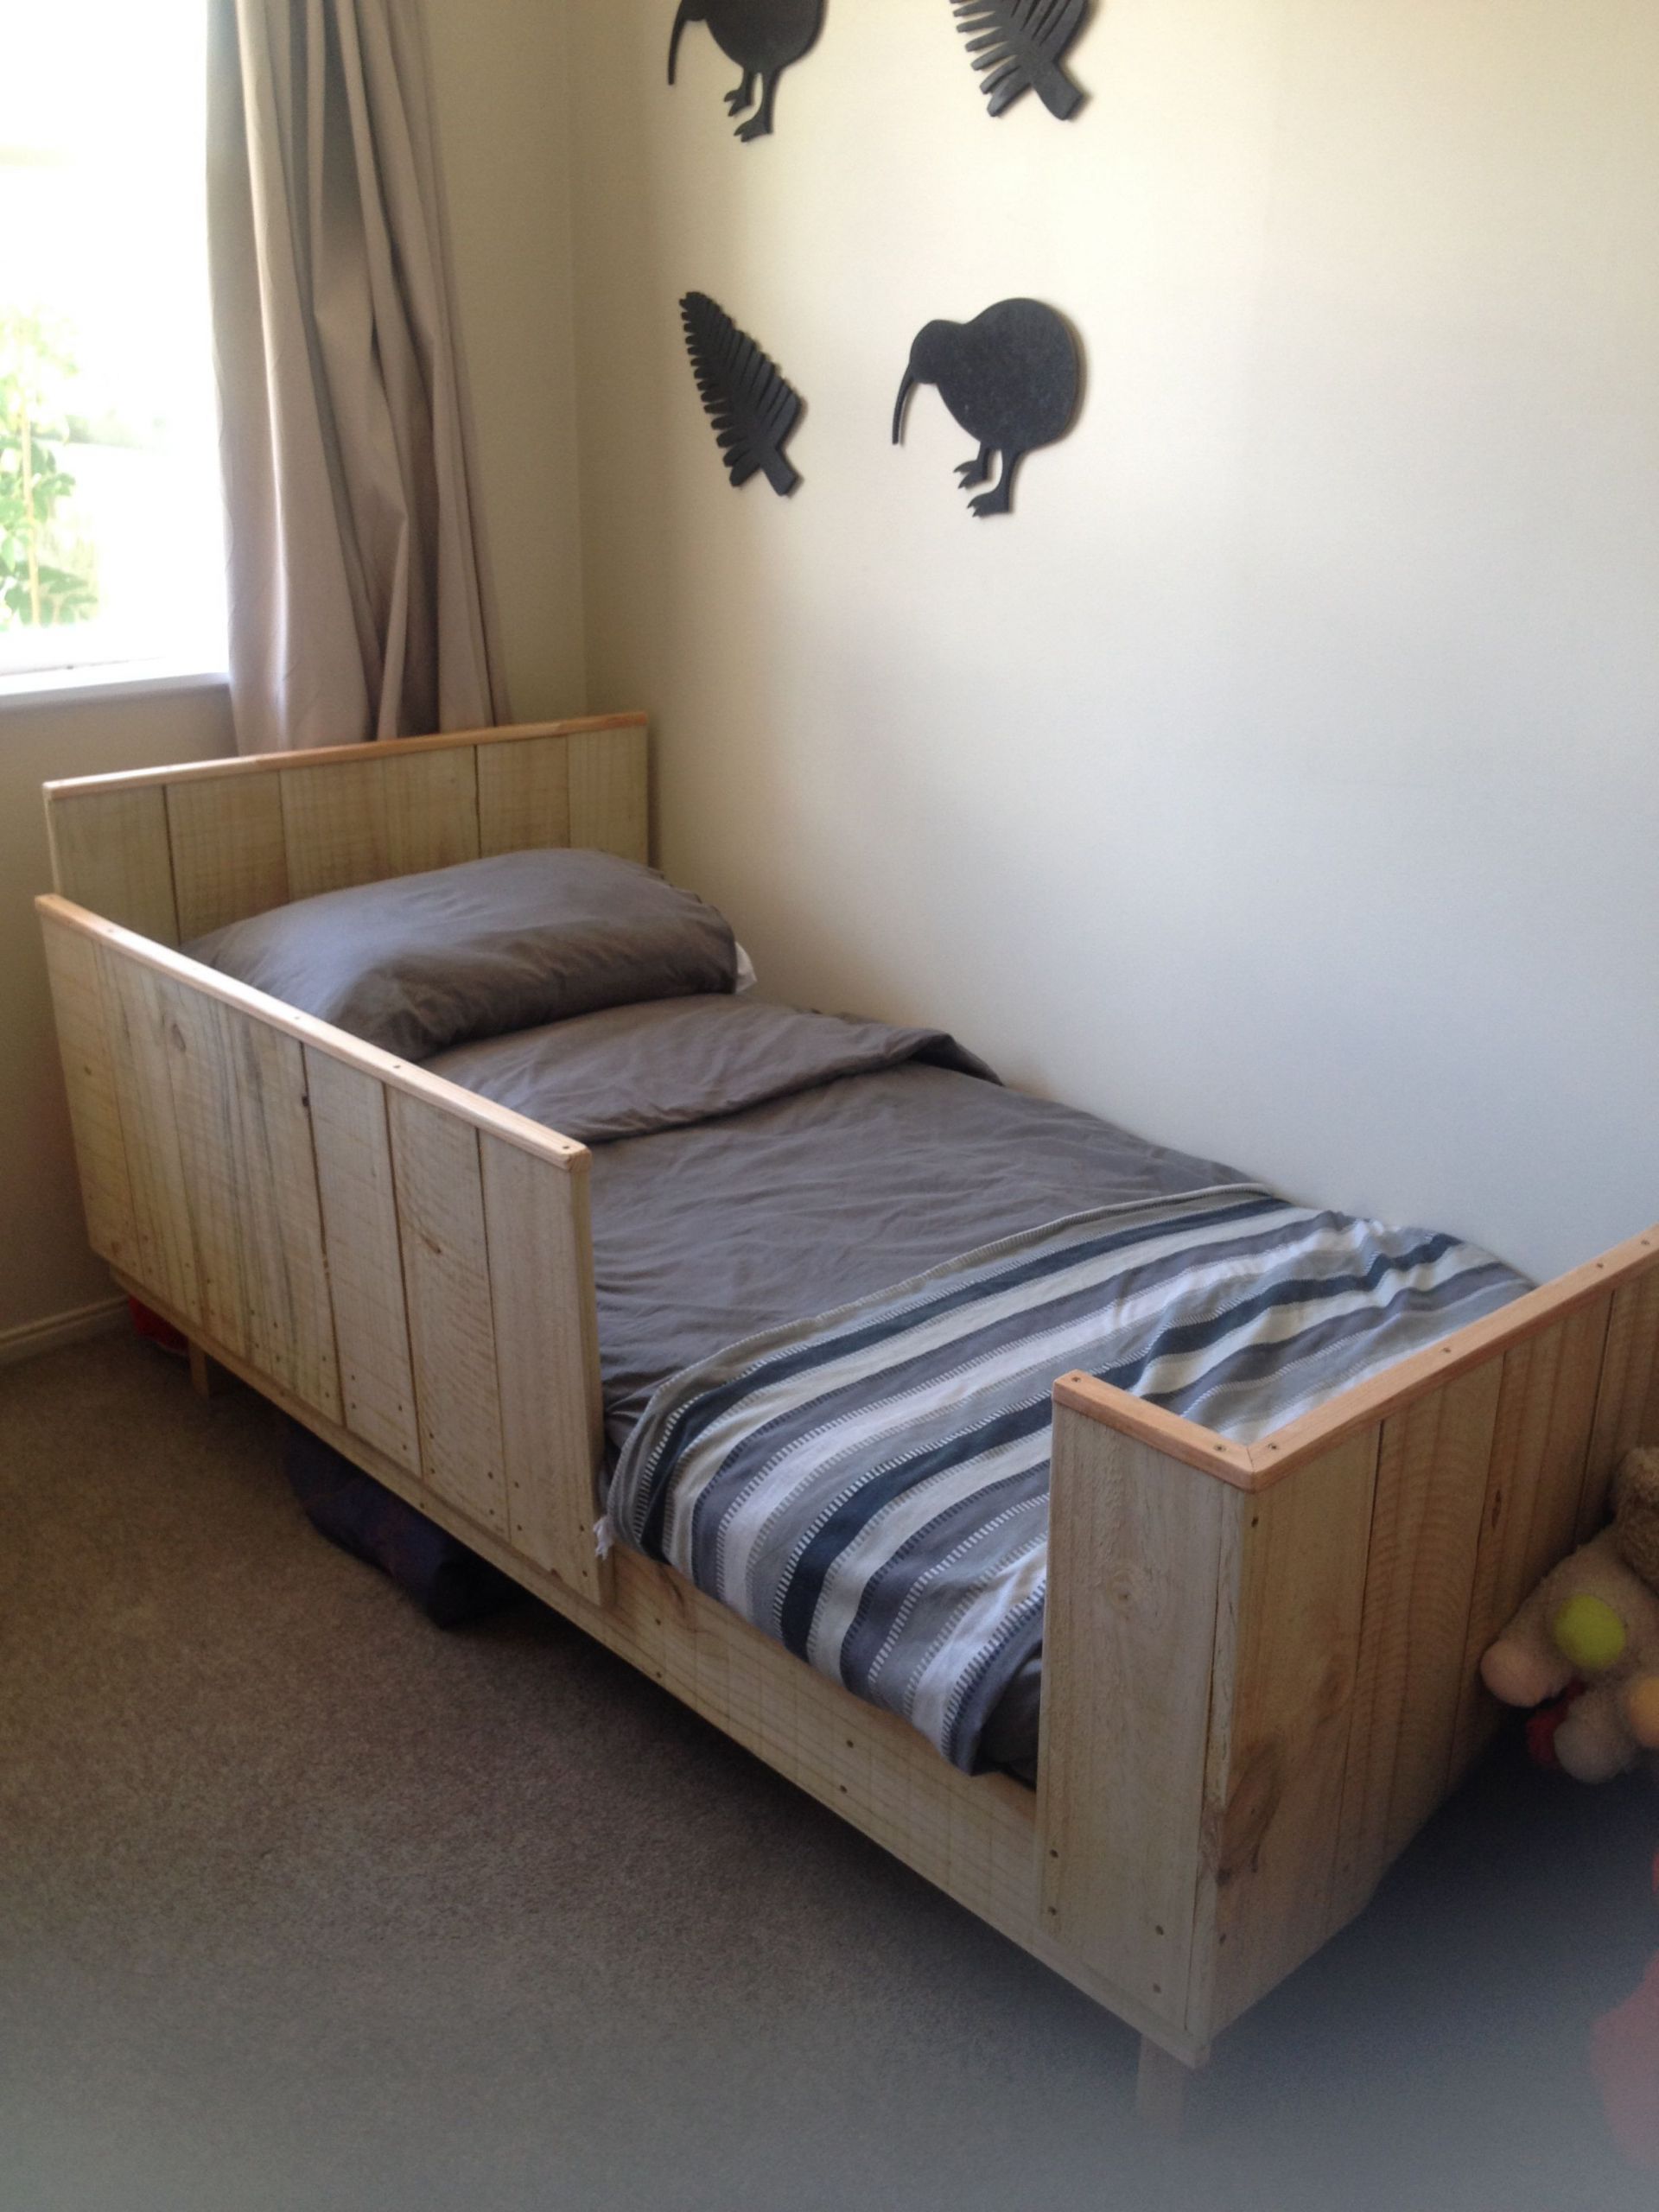 Toddler Bed DIY
 Technically my husband built our toddlers bed out of